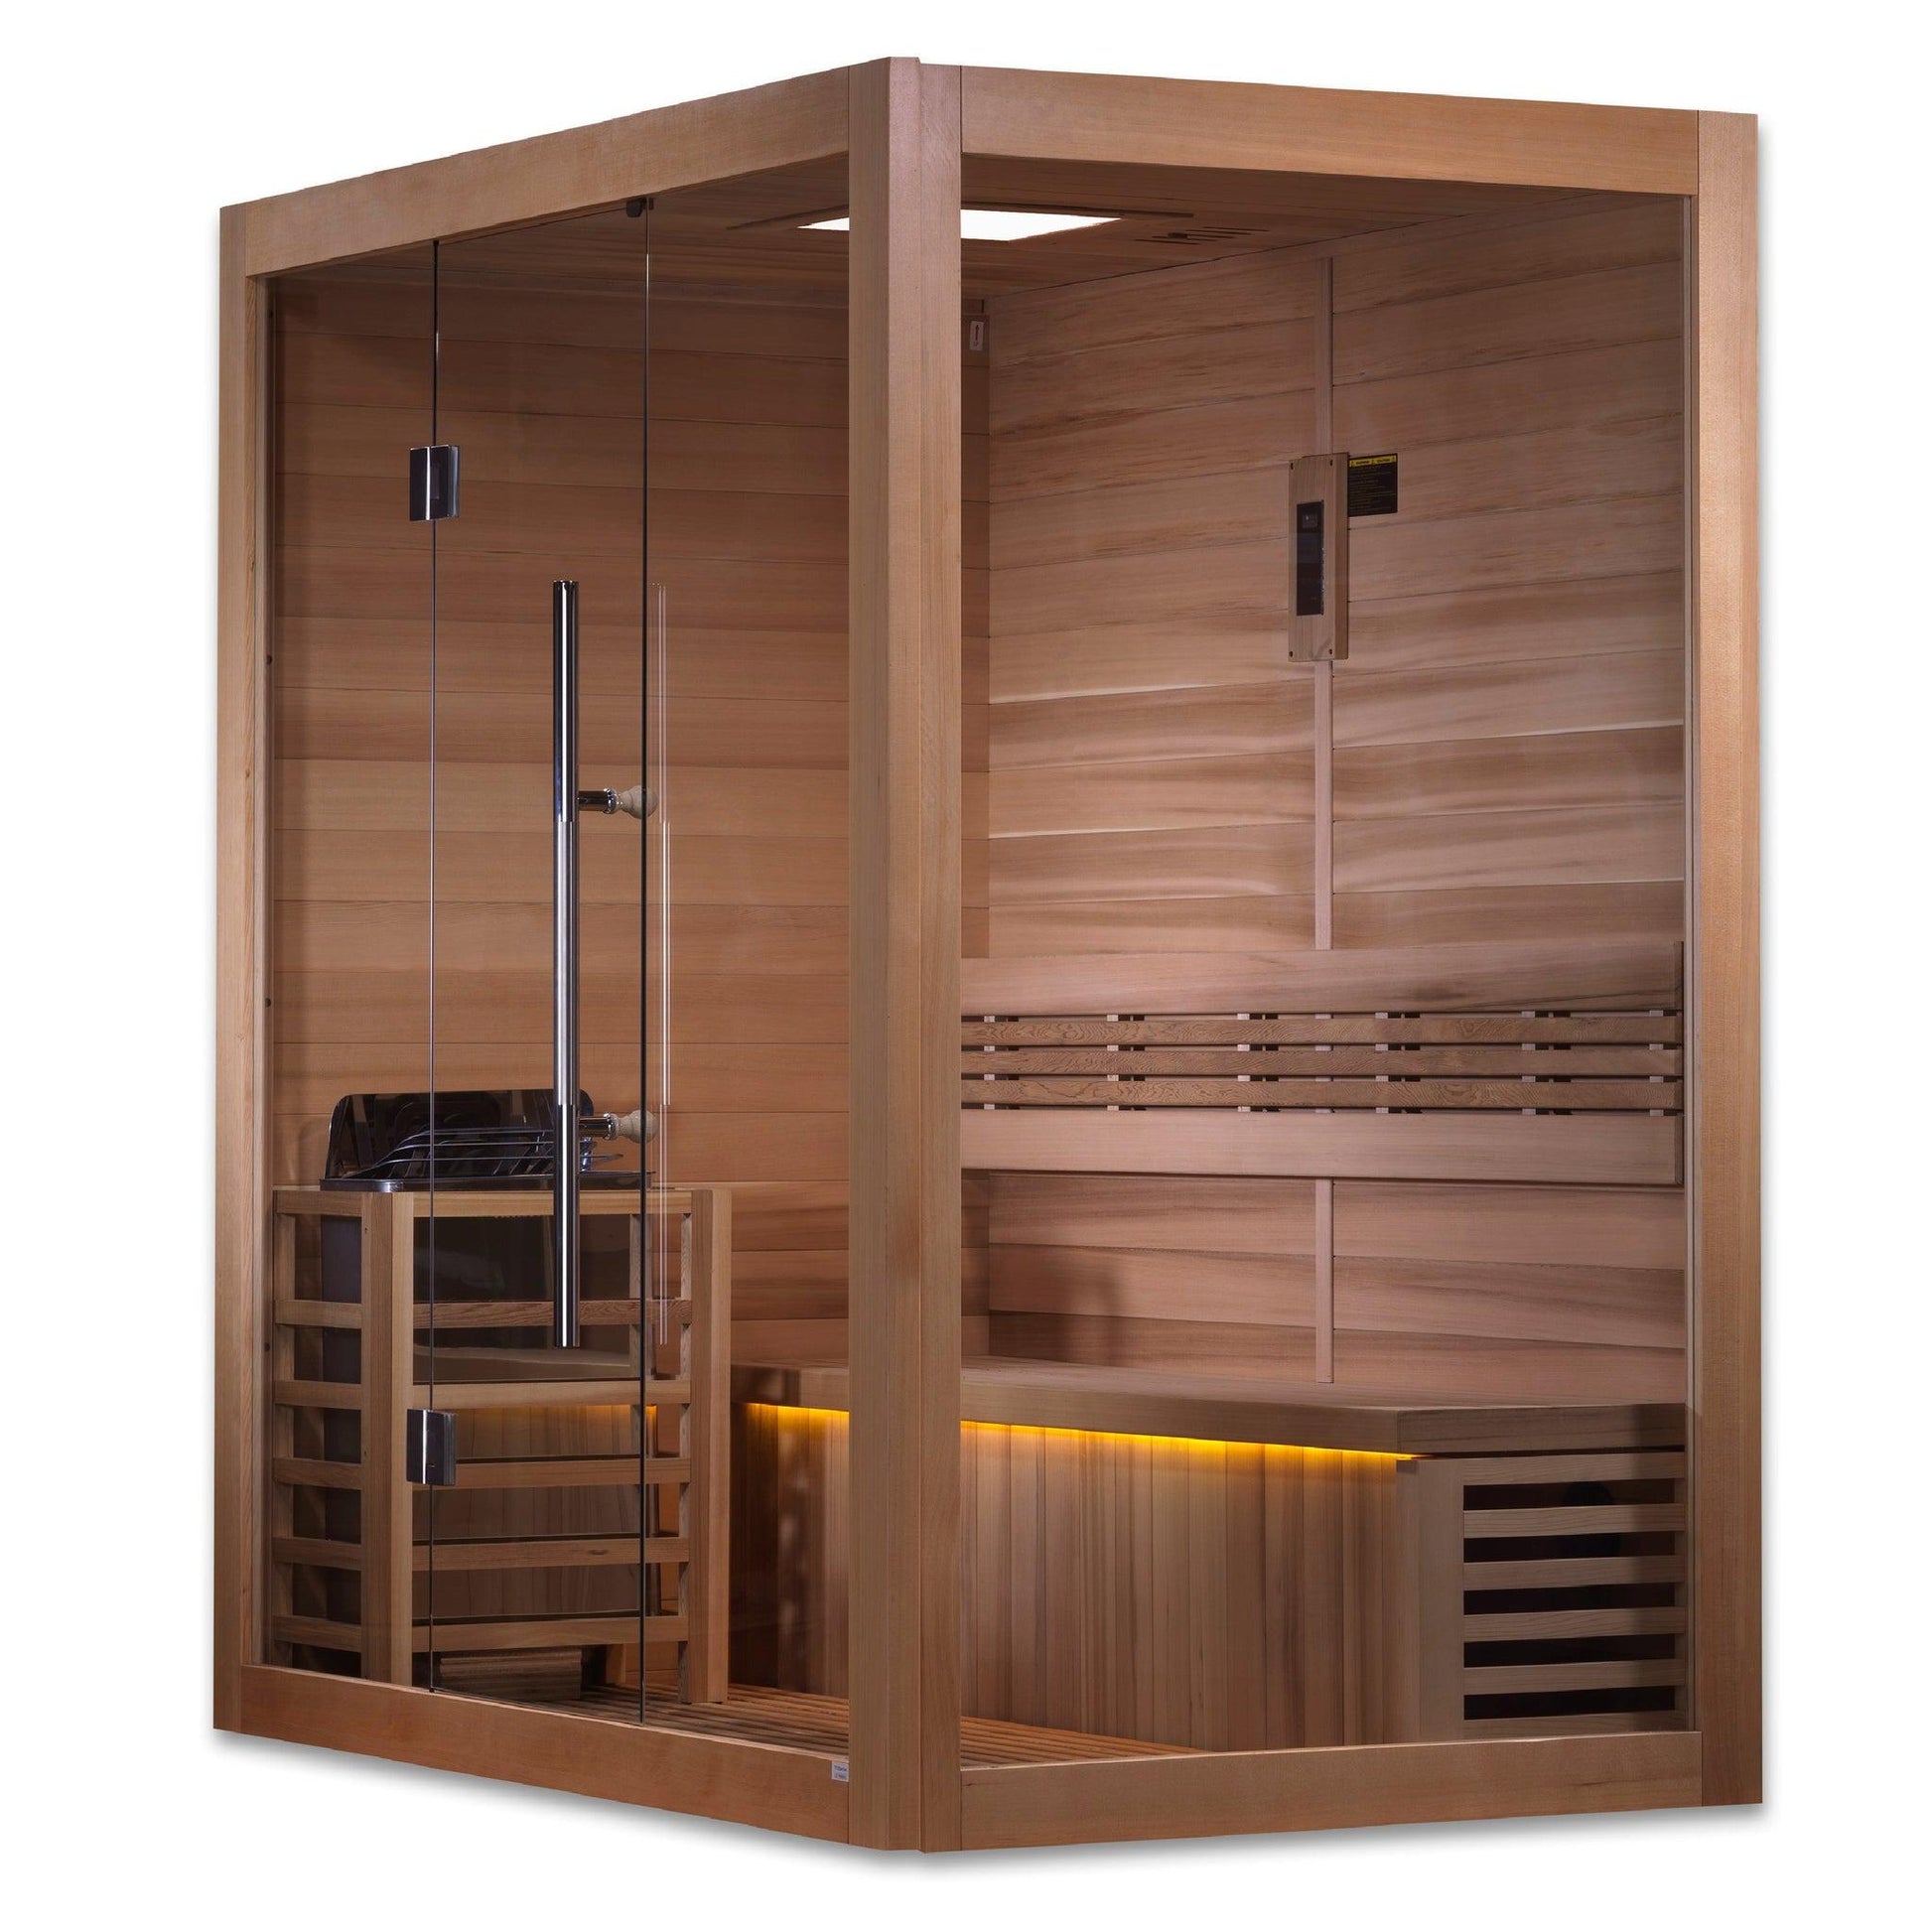 Golden Designs Forssa Edition 3-Person Indoor Traditional Steam Sauna All Glass Front and Wooden Right Side Wall in Canadian Red Cedar Interior and Hemlock Exterior